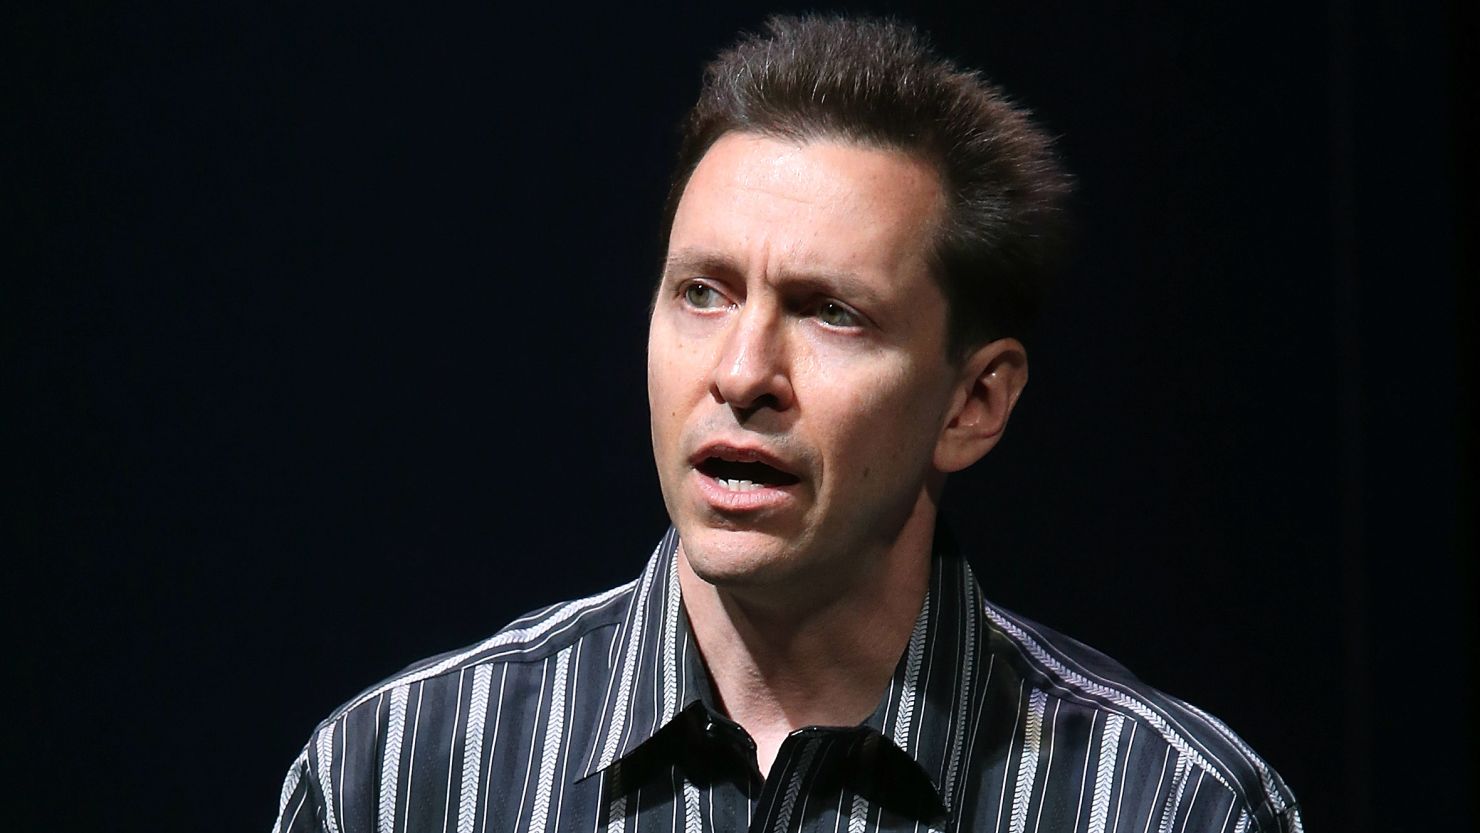 Former Apple exec Scott Forstall at the unveiling of the iPhone 5 in September.